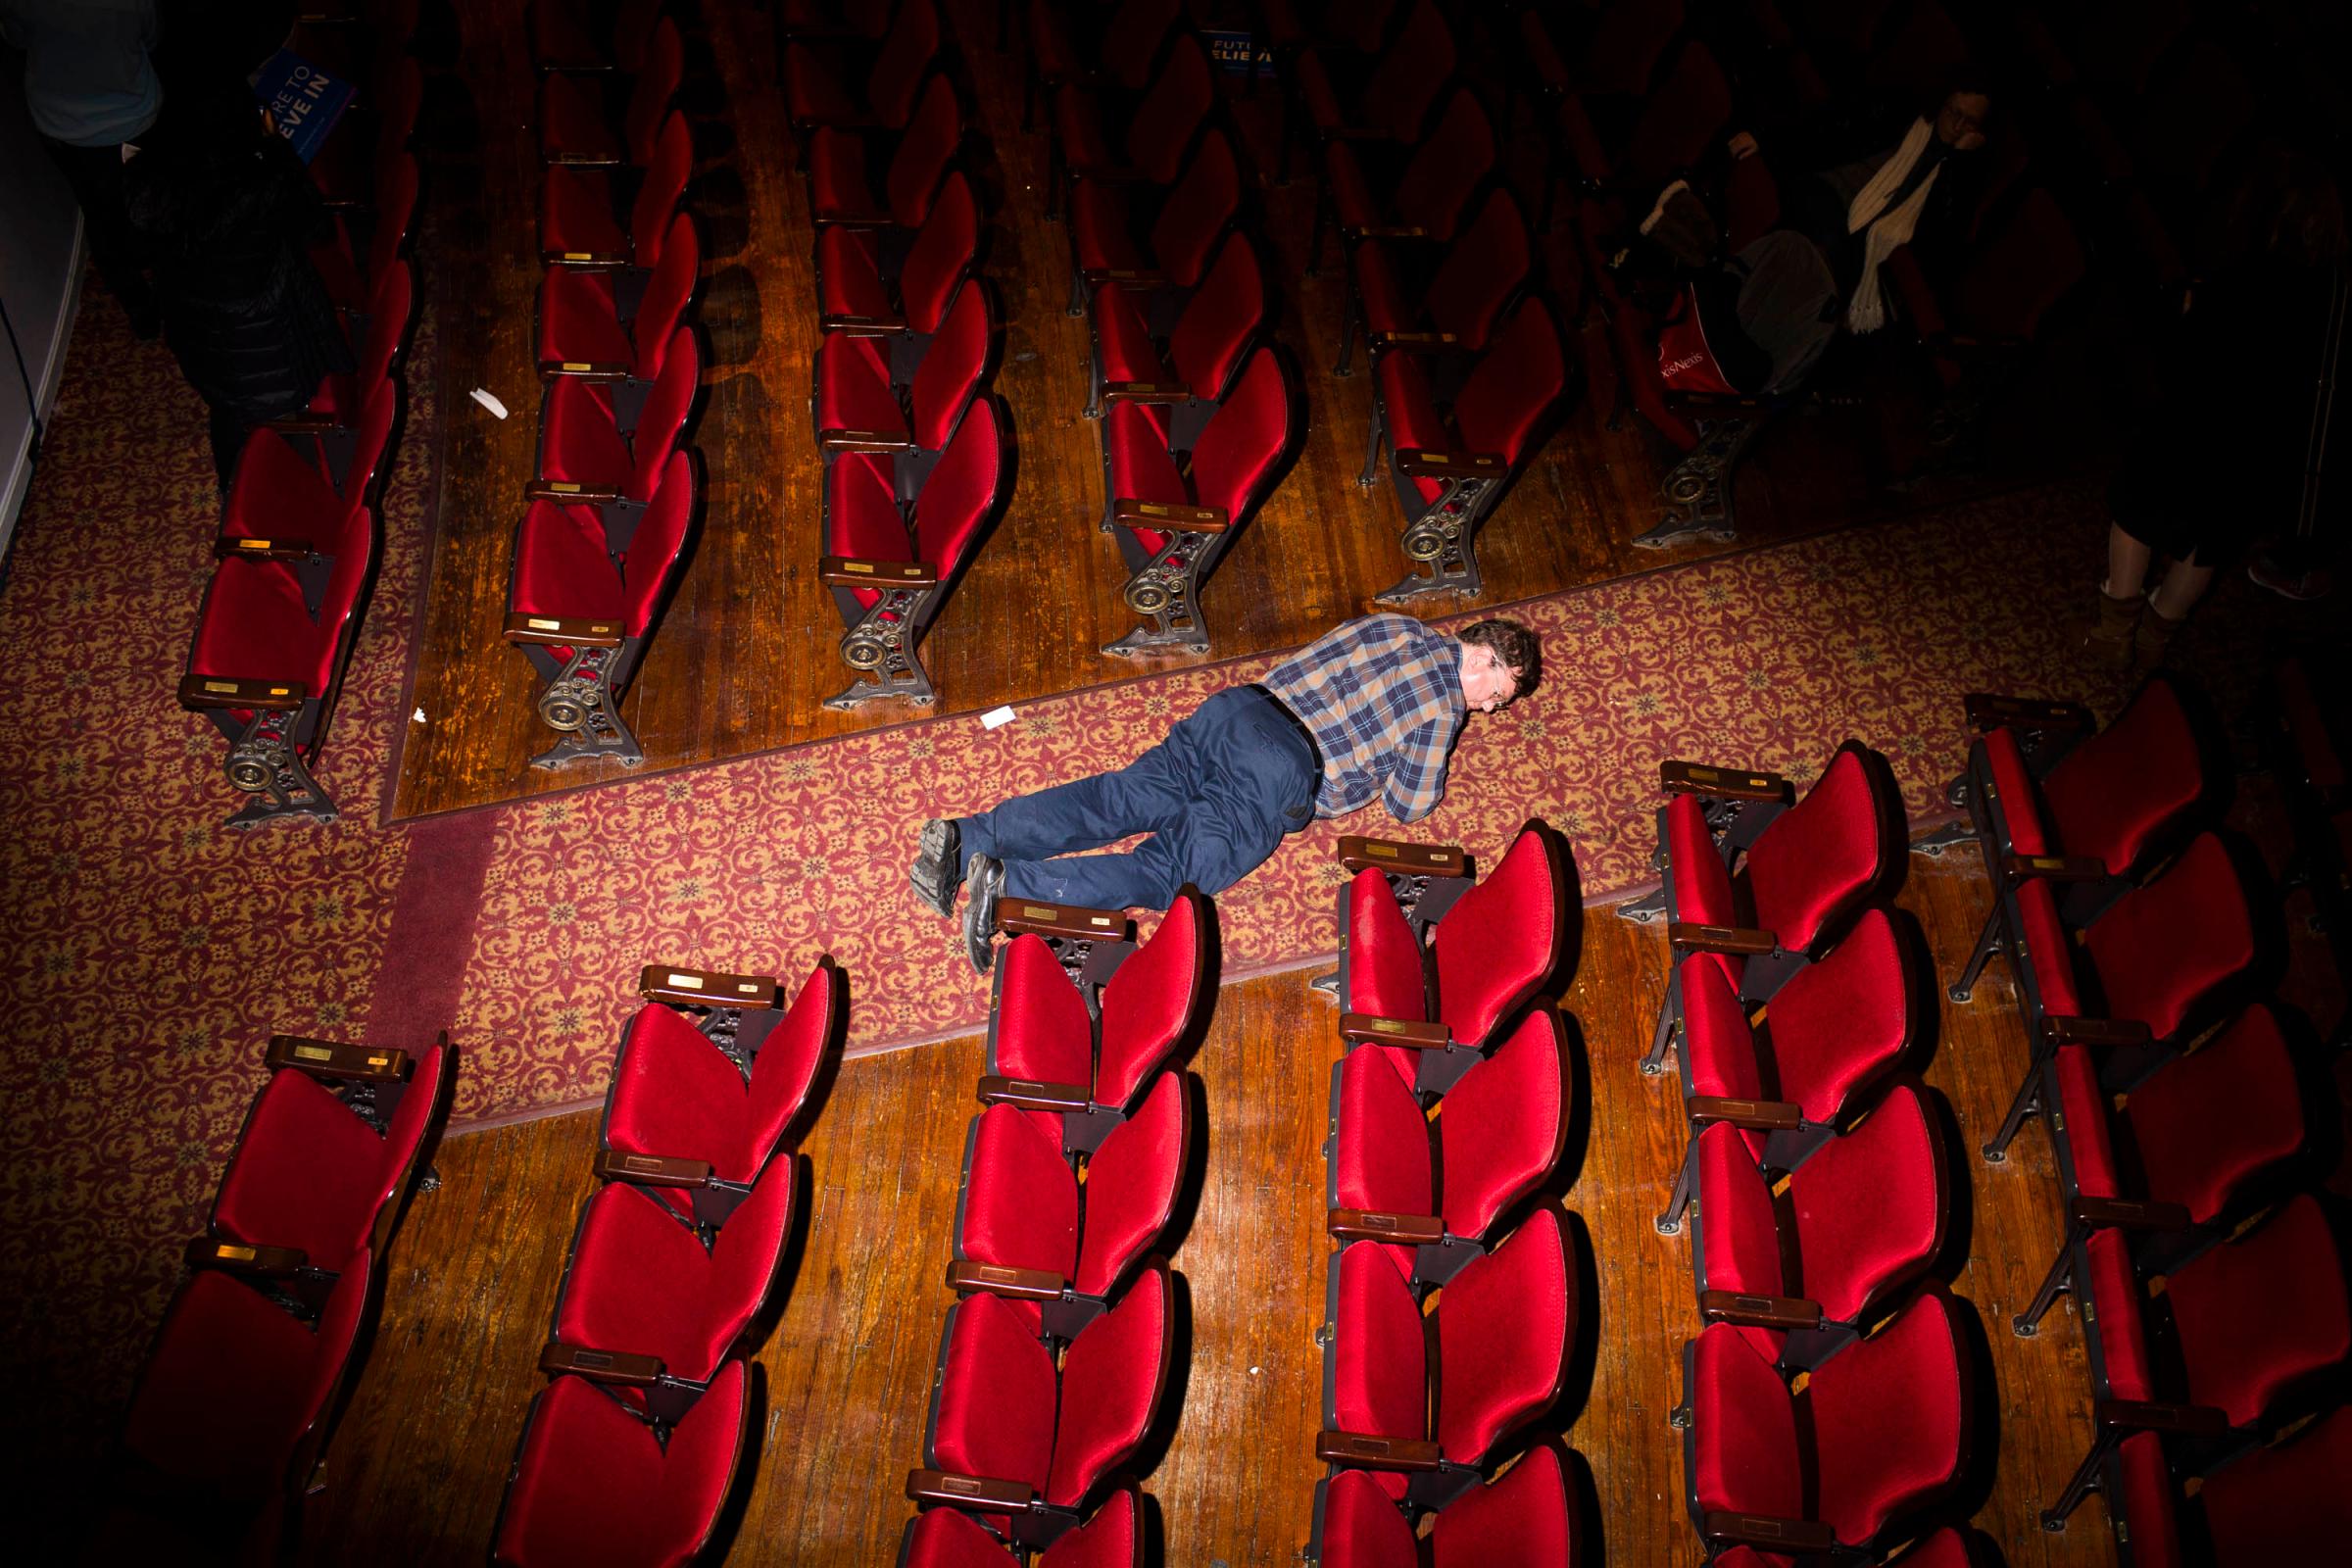 A man looks for something he dropped at the Palace Theater, where Democratic presidential candidate, Vermont Sen. Bernie Sanders held a campaign event on Feb. 8, 2016, in Manchester, N.H.